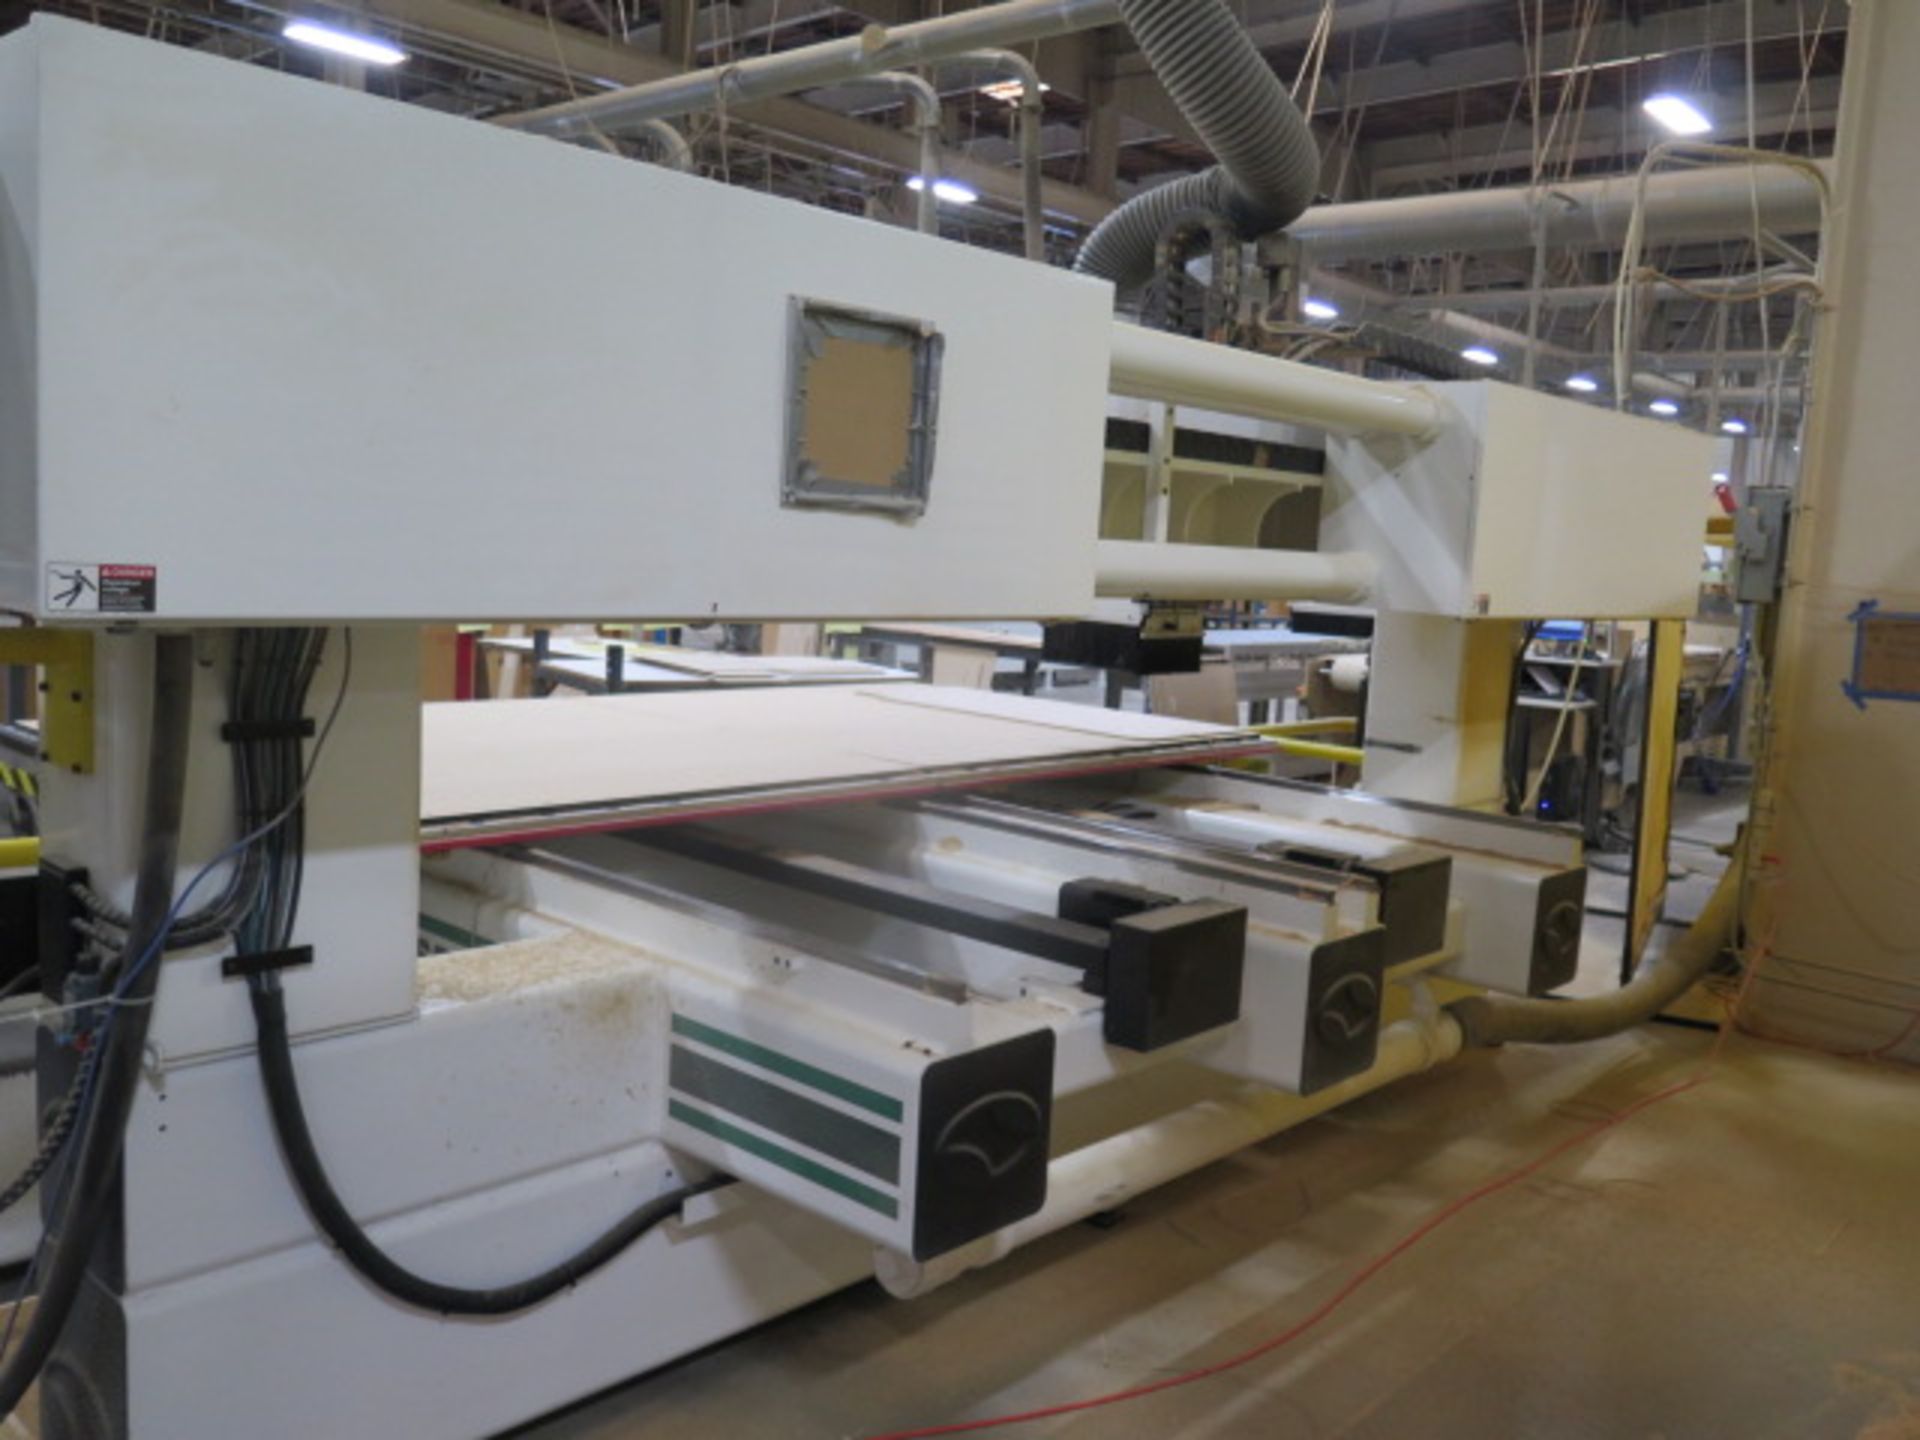 2008 C.R. Onsrud 122C18 CNC Router s/n 12280701 w/ WinMedia CNC Controls, SOLD AS IS - Image 15 of 18